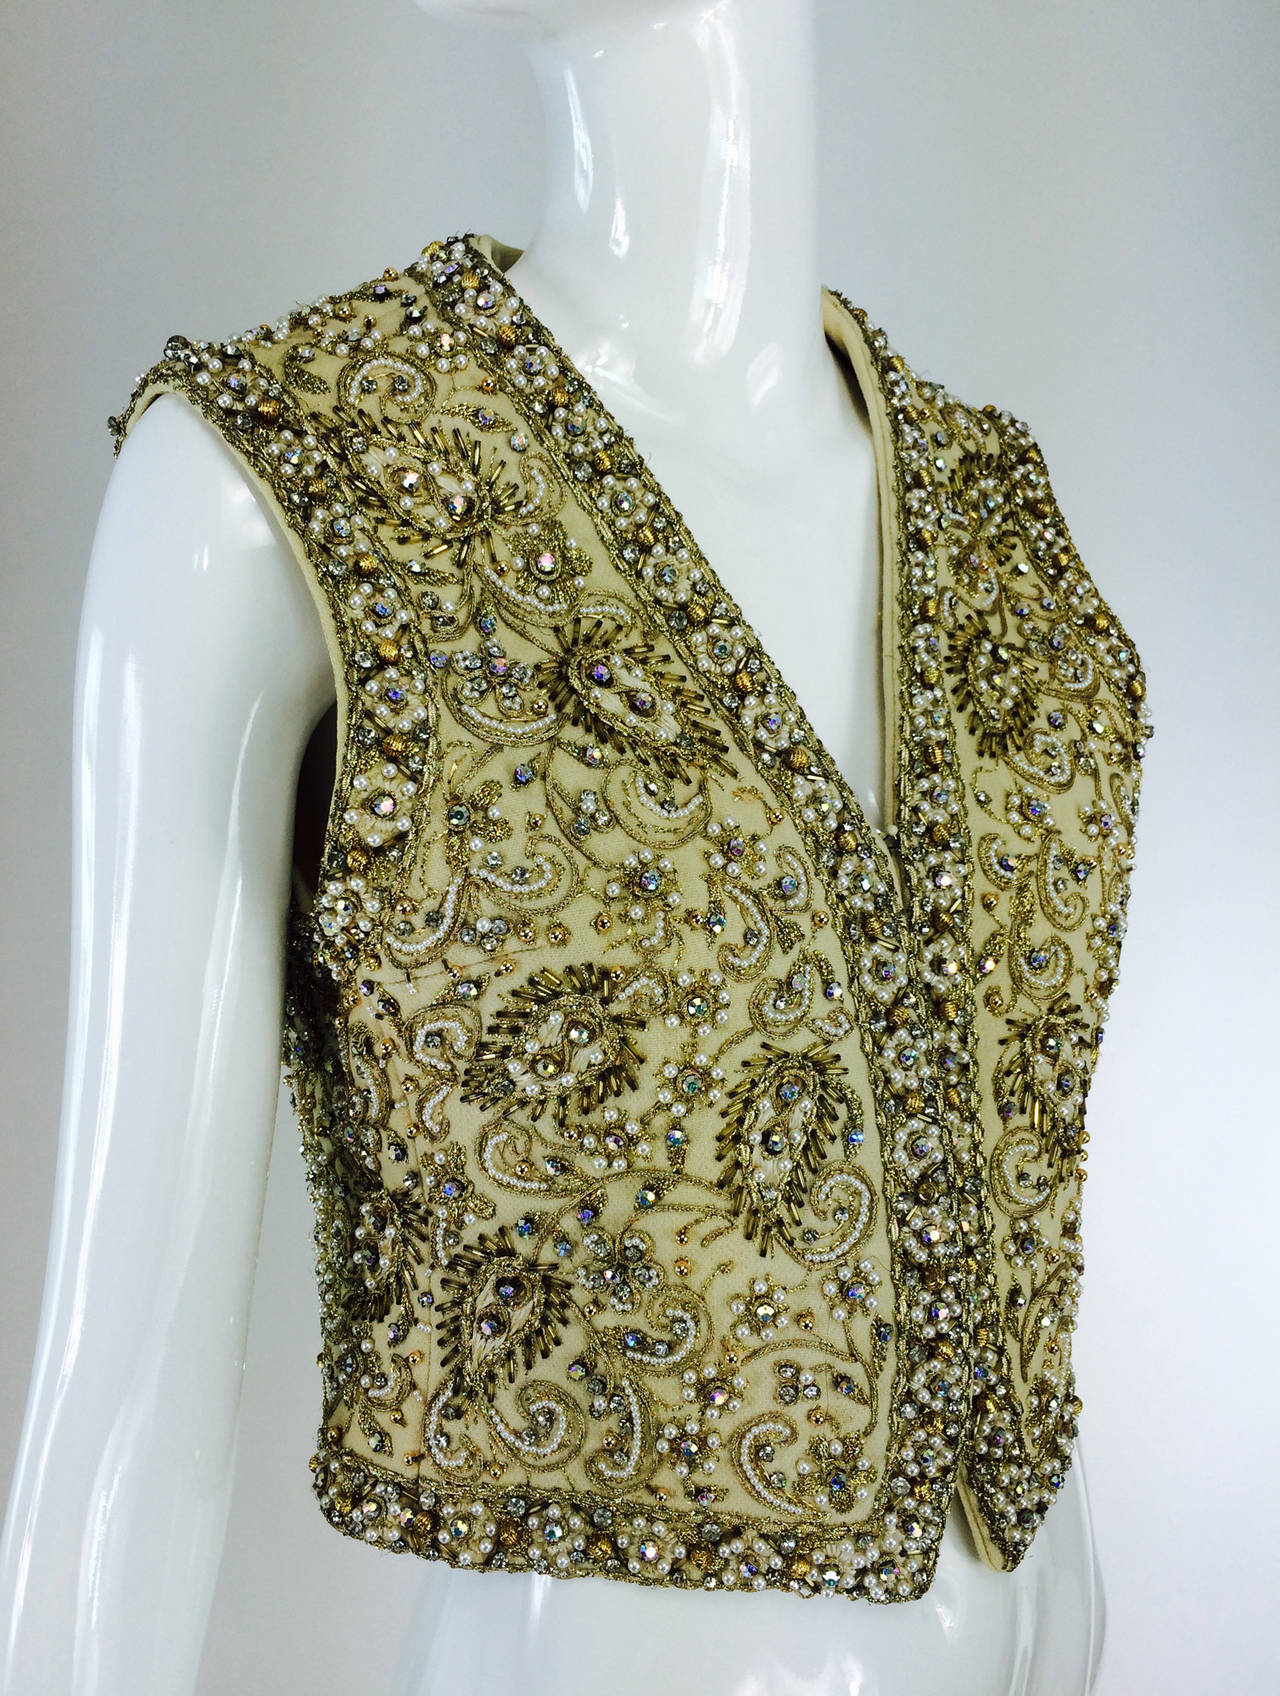 Marie McCarthy for Larry Aldrich gold sequin & rhinestone beaded vest 1960s...This beautiful vest of cream wool is heavily covered in glittery crystal sequins and beads, pearls, gold cord work, and gold beading...From the mid 1960s..Fully lined in